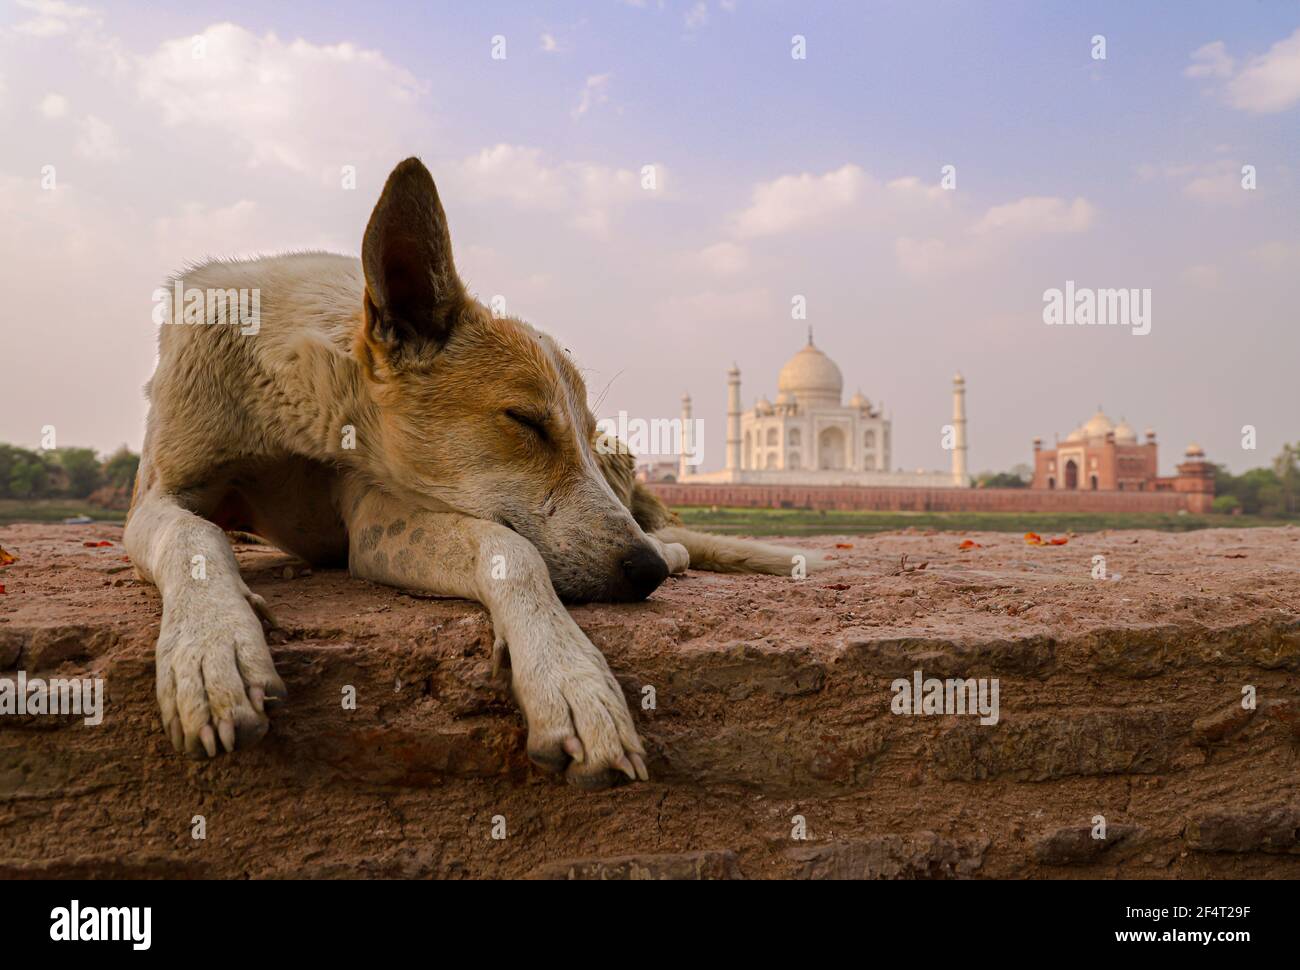 a dog is sleeping on foreground and beautiful taj mahal in background. Stock Photo